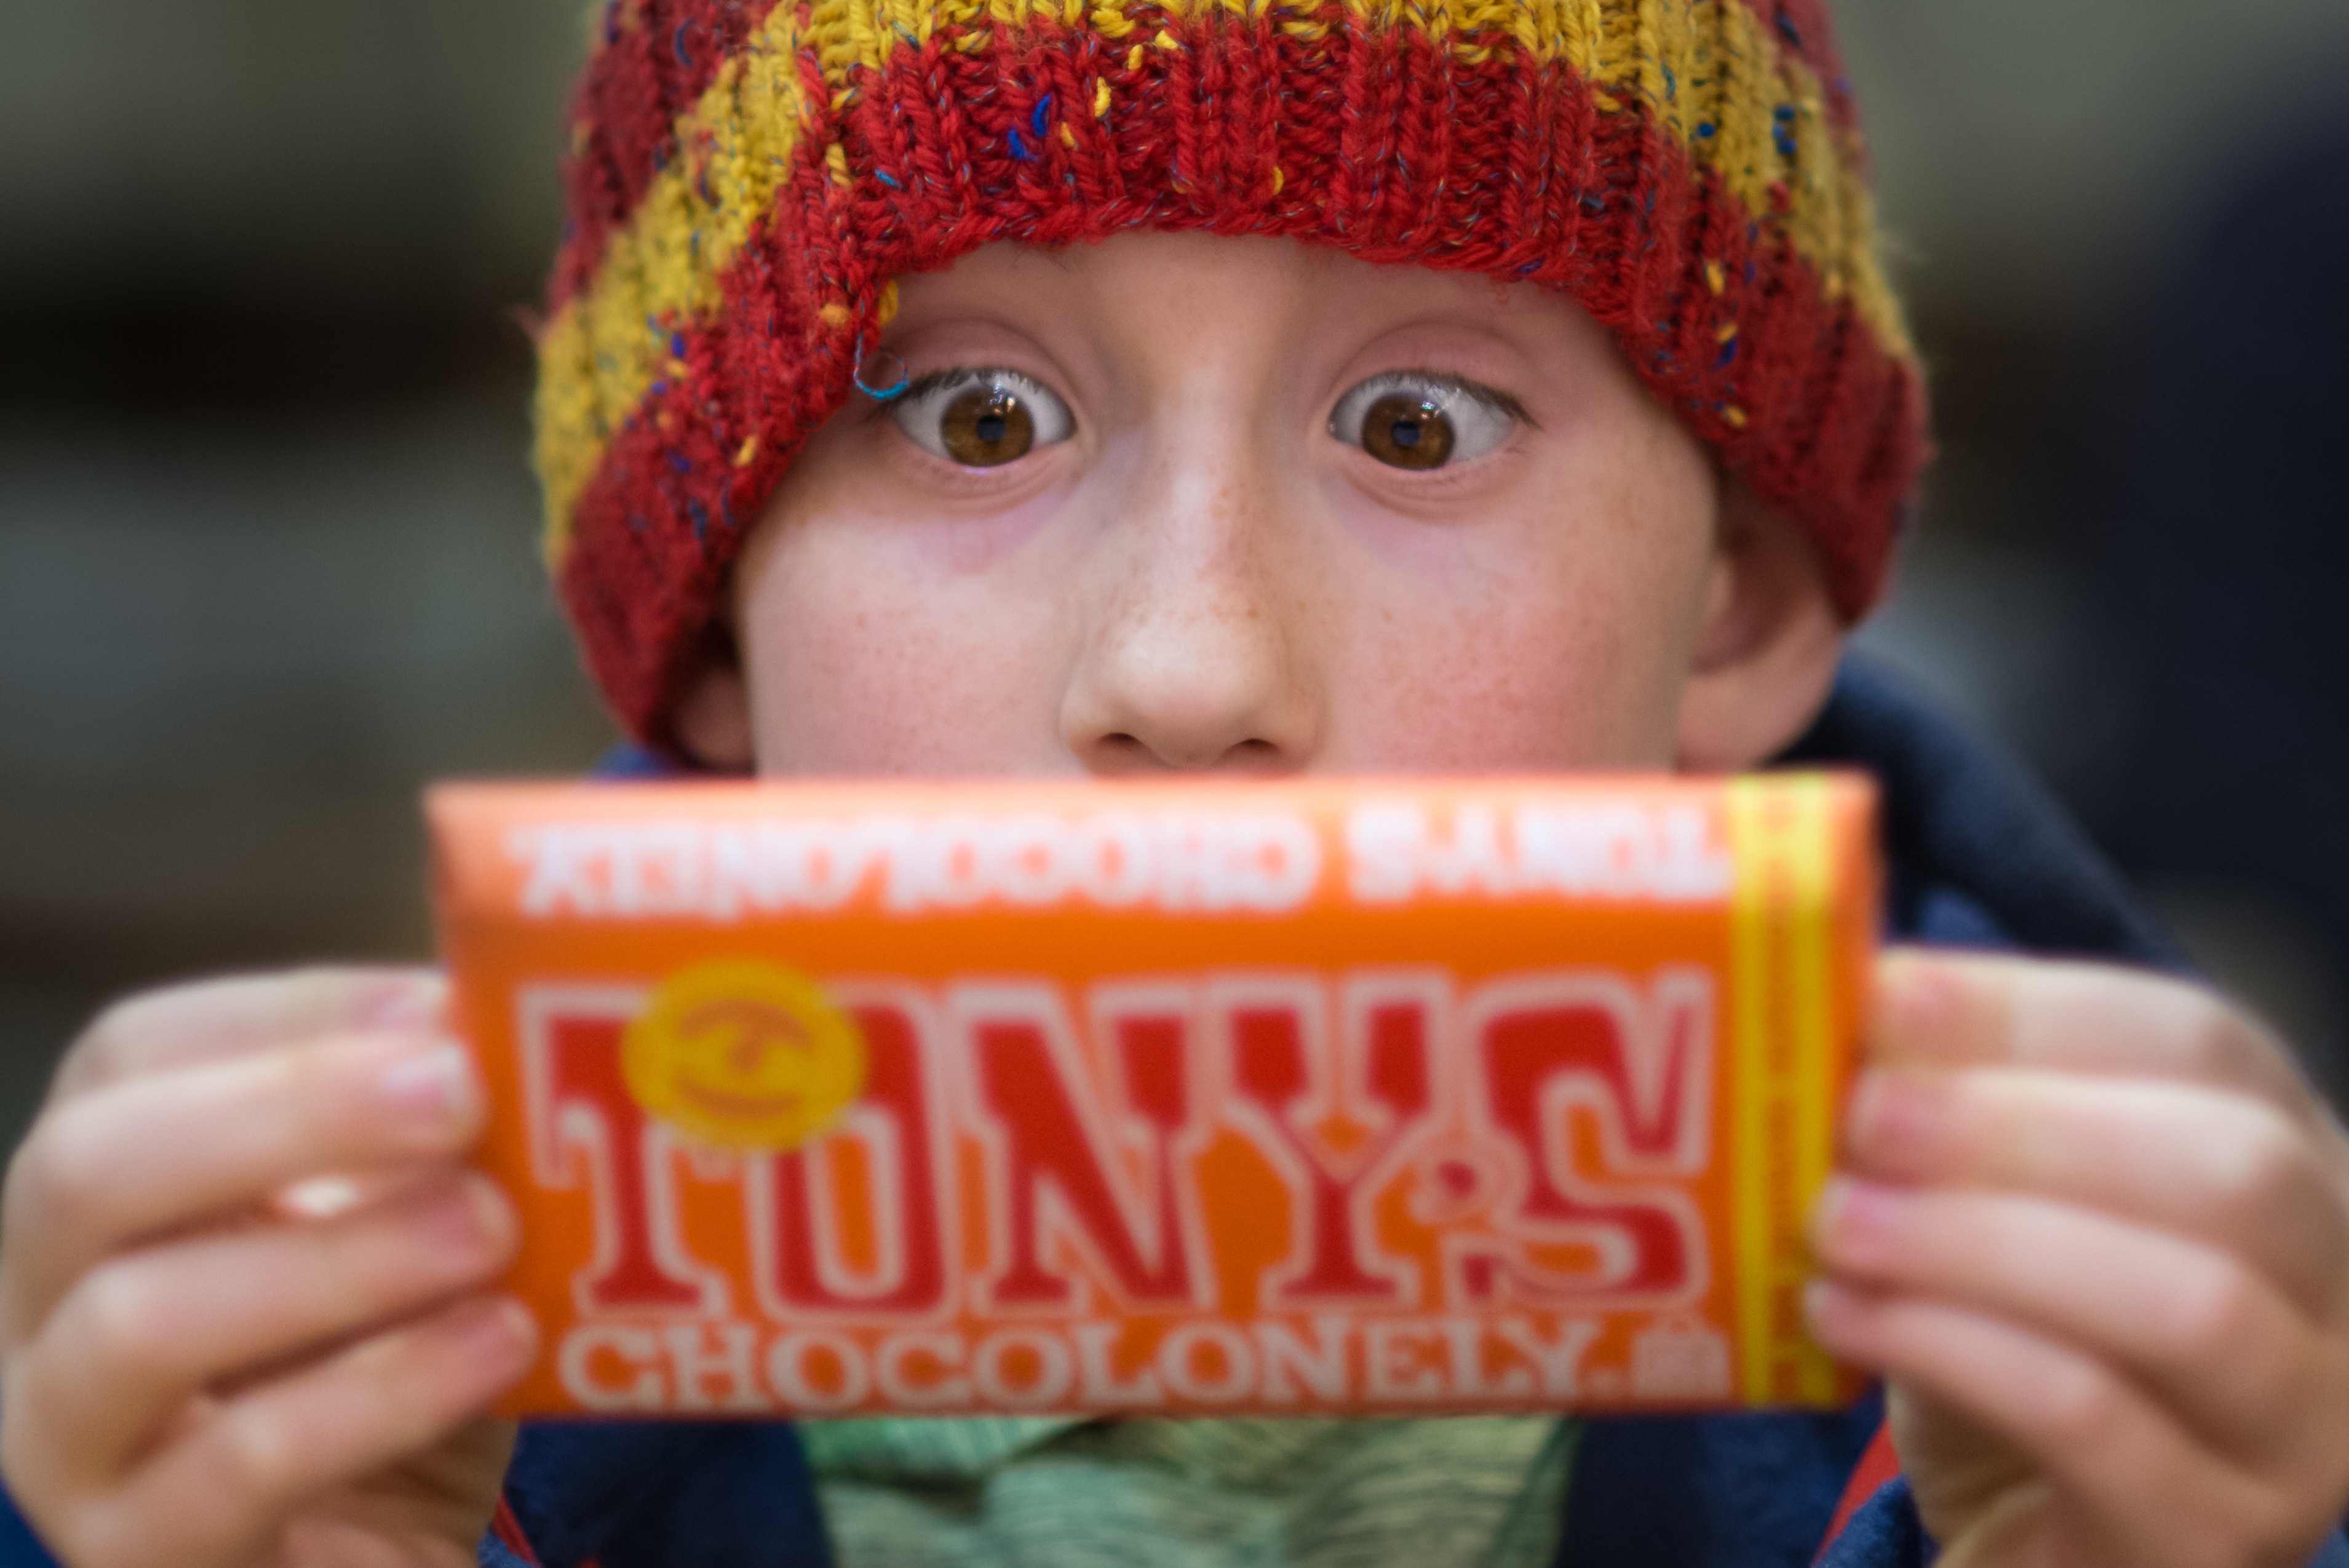 boy holding a tonnys chocolonely pack